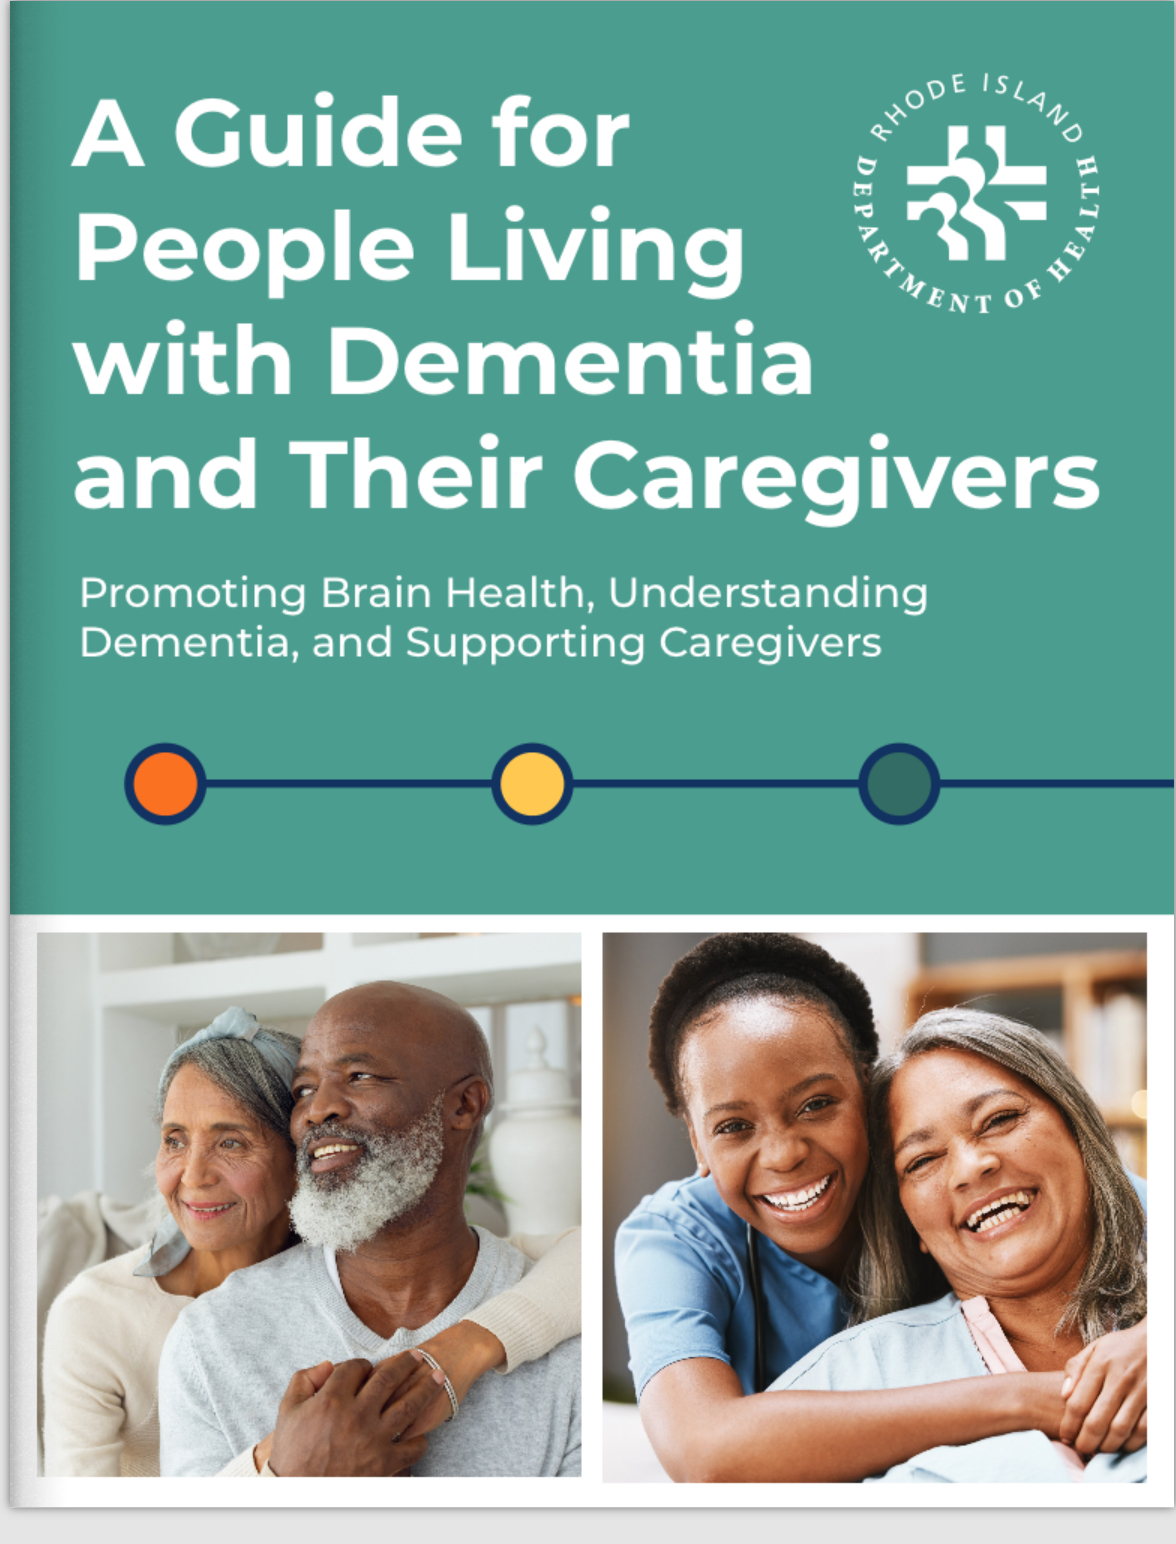 New Guide for People Living with Dementia and Their Caregivers